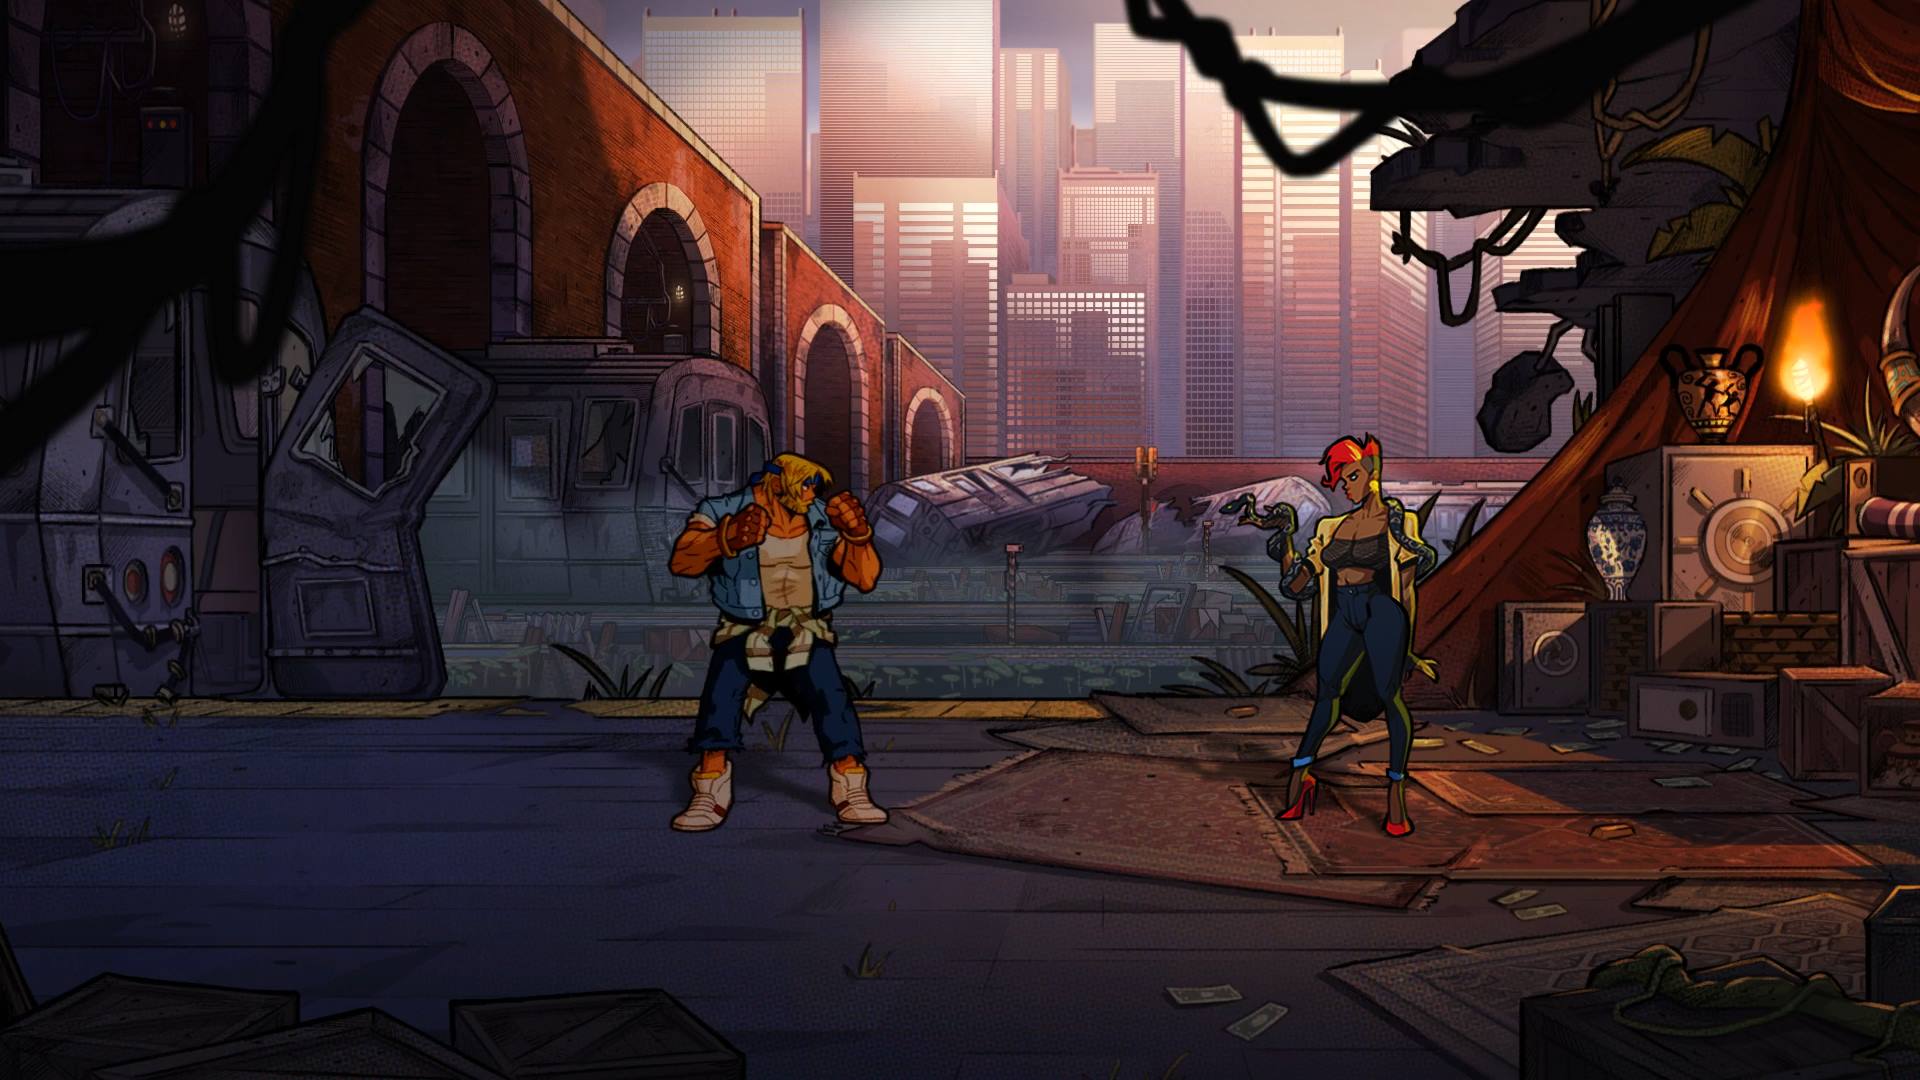 Streets of Rage 4 Wallpapers